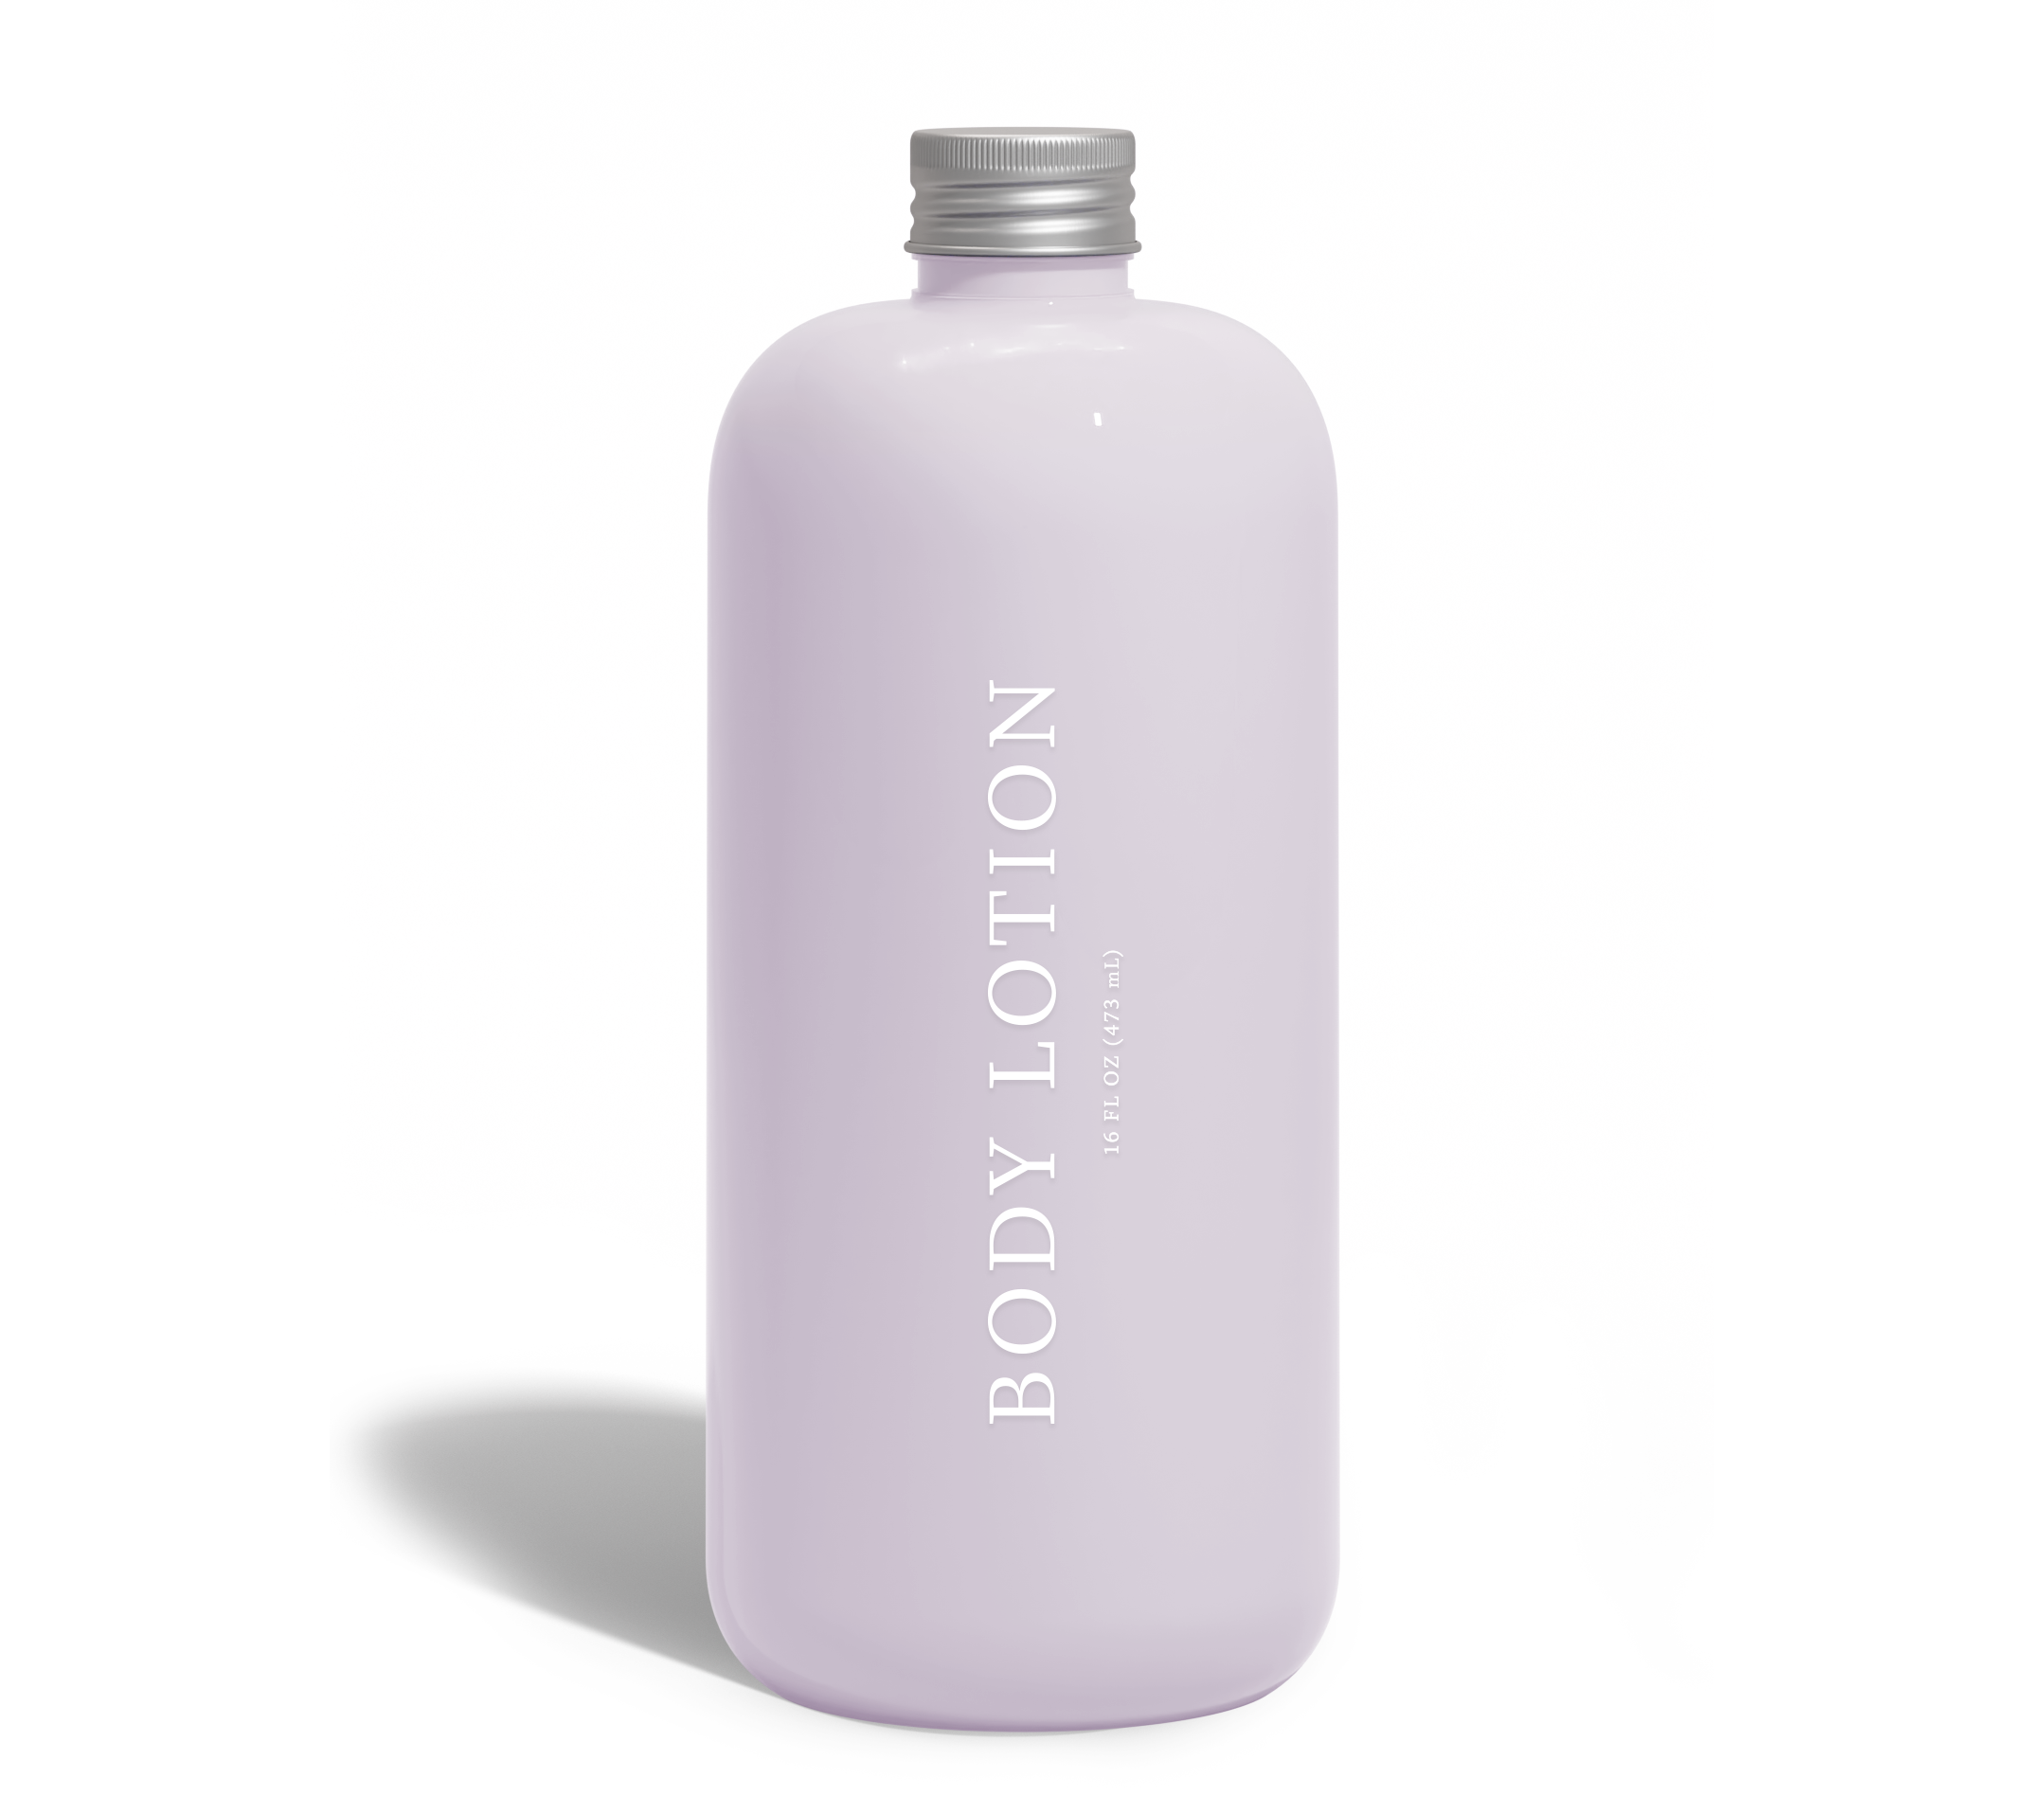 Customized body lotion bottle in lavender color. 